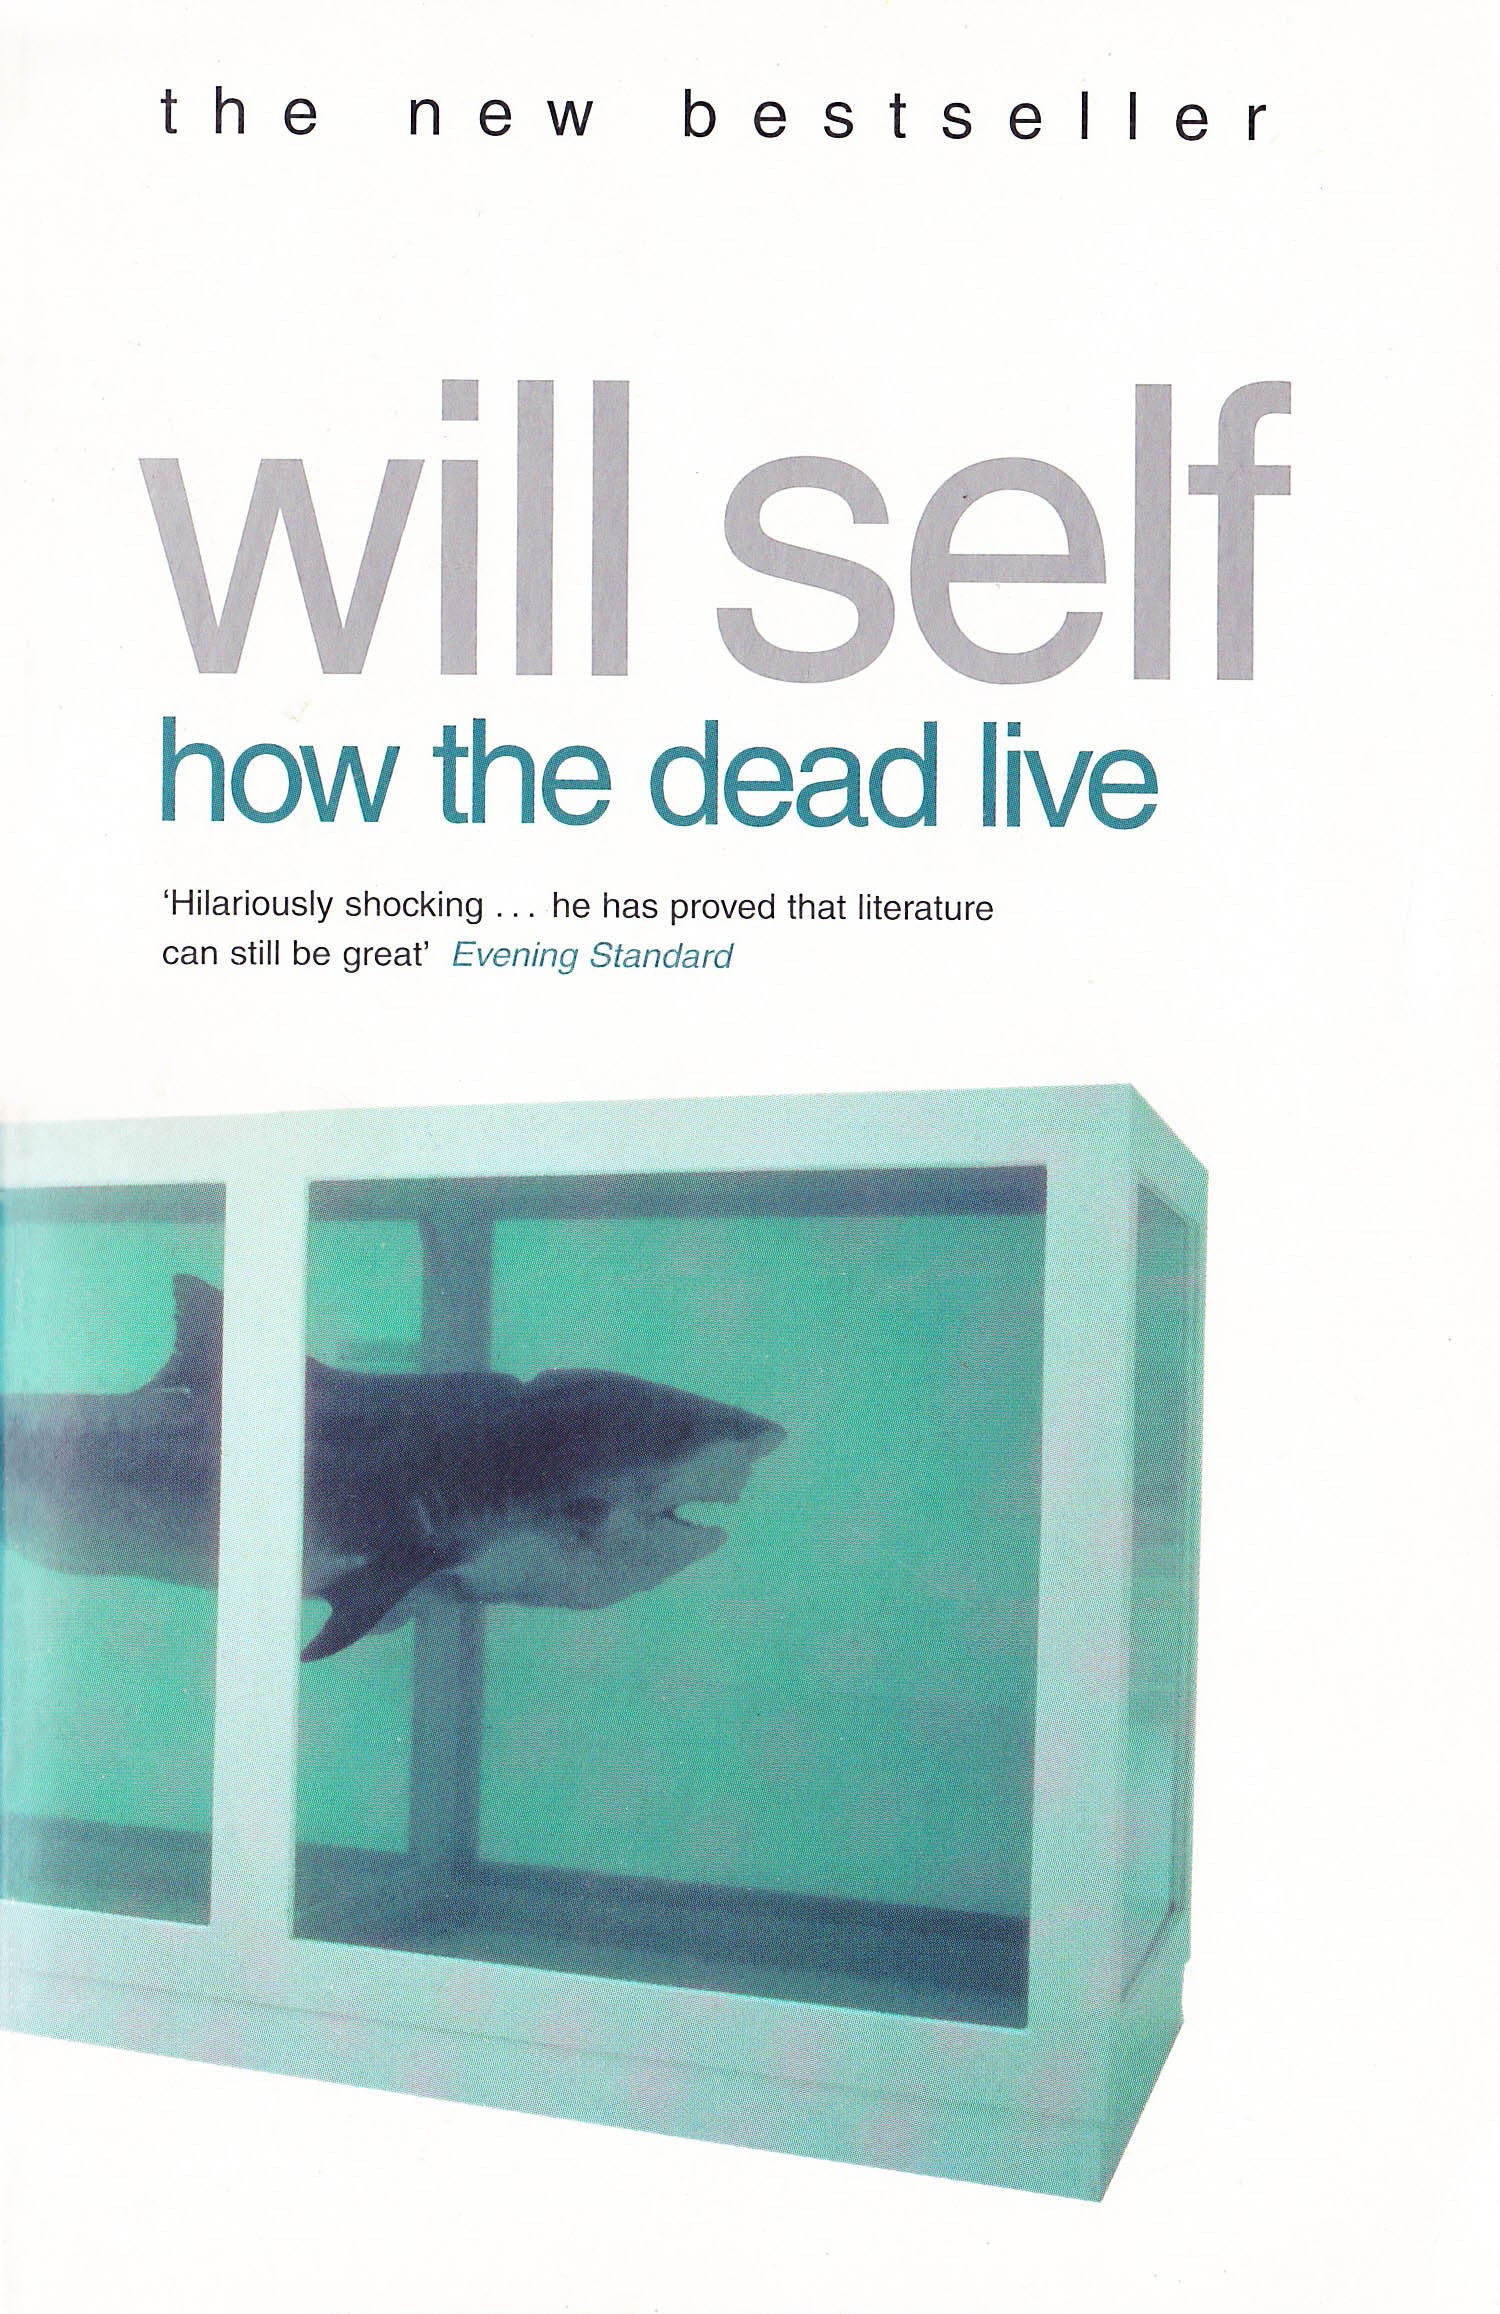 How the dead live